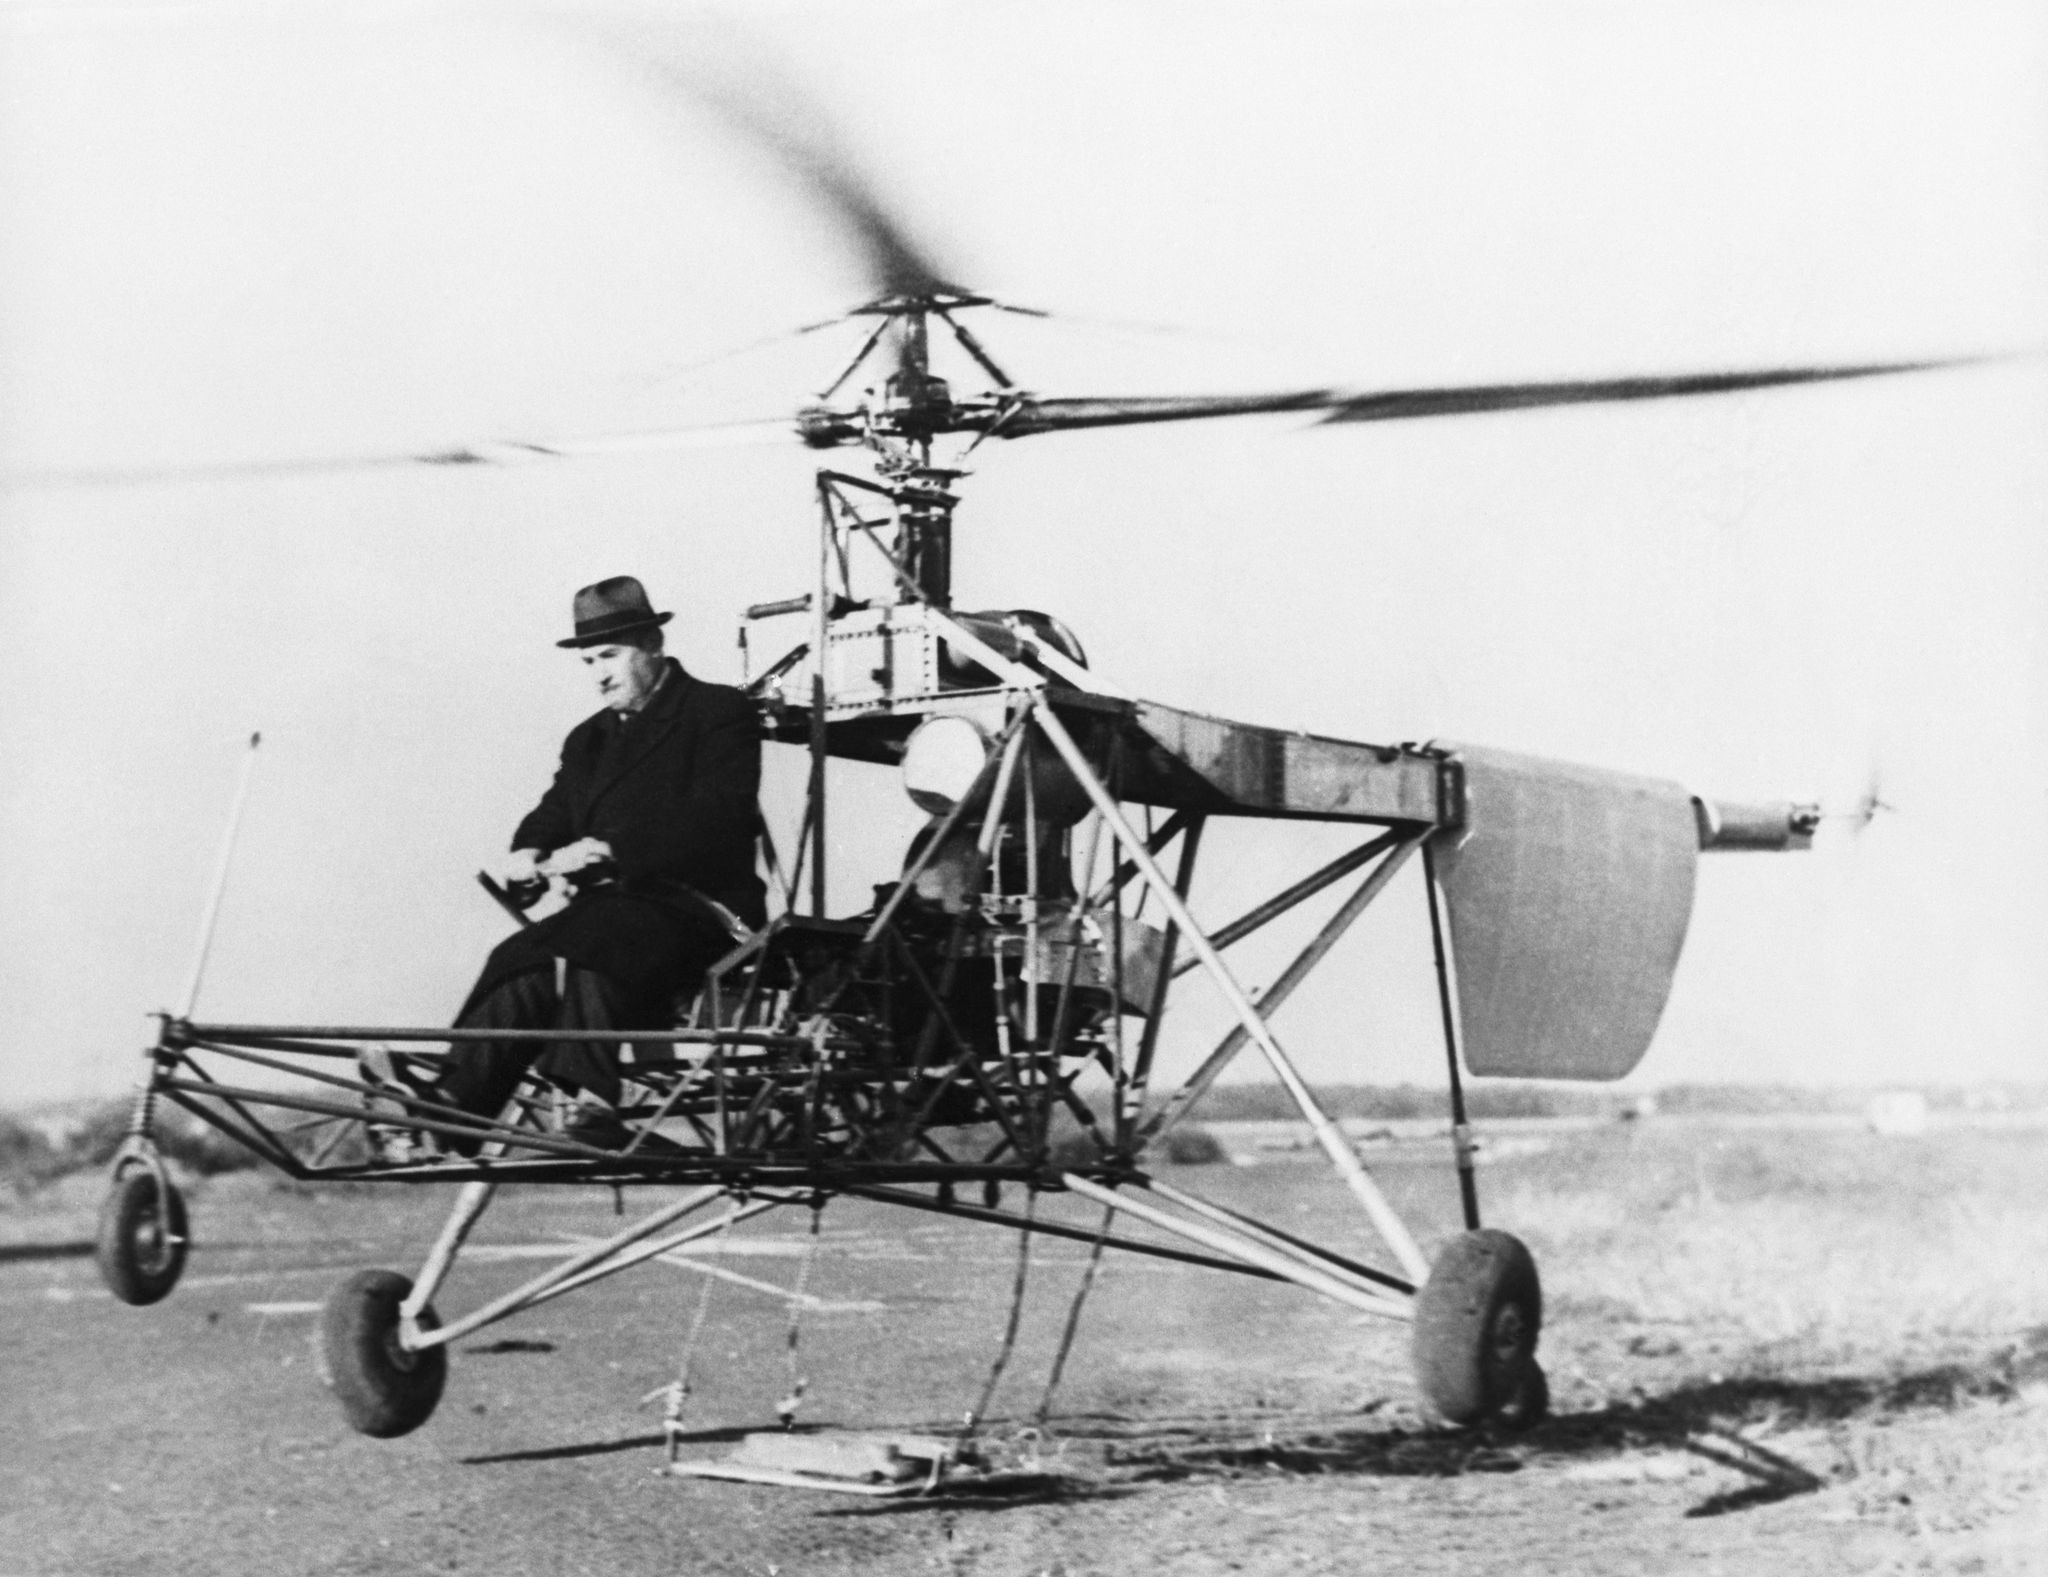 the vs 300, created by igor sikorsky, became the first successful helicopter after its historic tethered flight on september 14, 1939 the following spring, the helicopter could stay airborne for as long as 15 minutes, and in 1941 it established a world record world a flight of 1 hour, 32 minutes, and 26 seconds